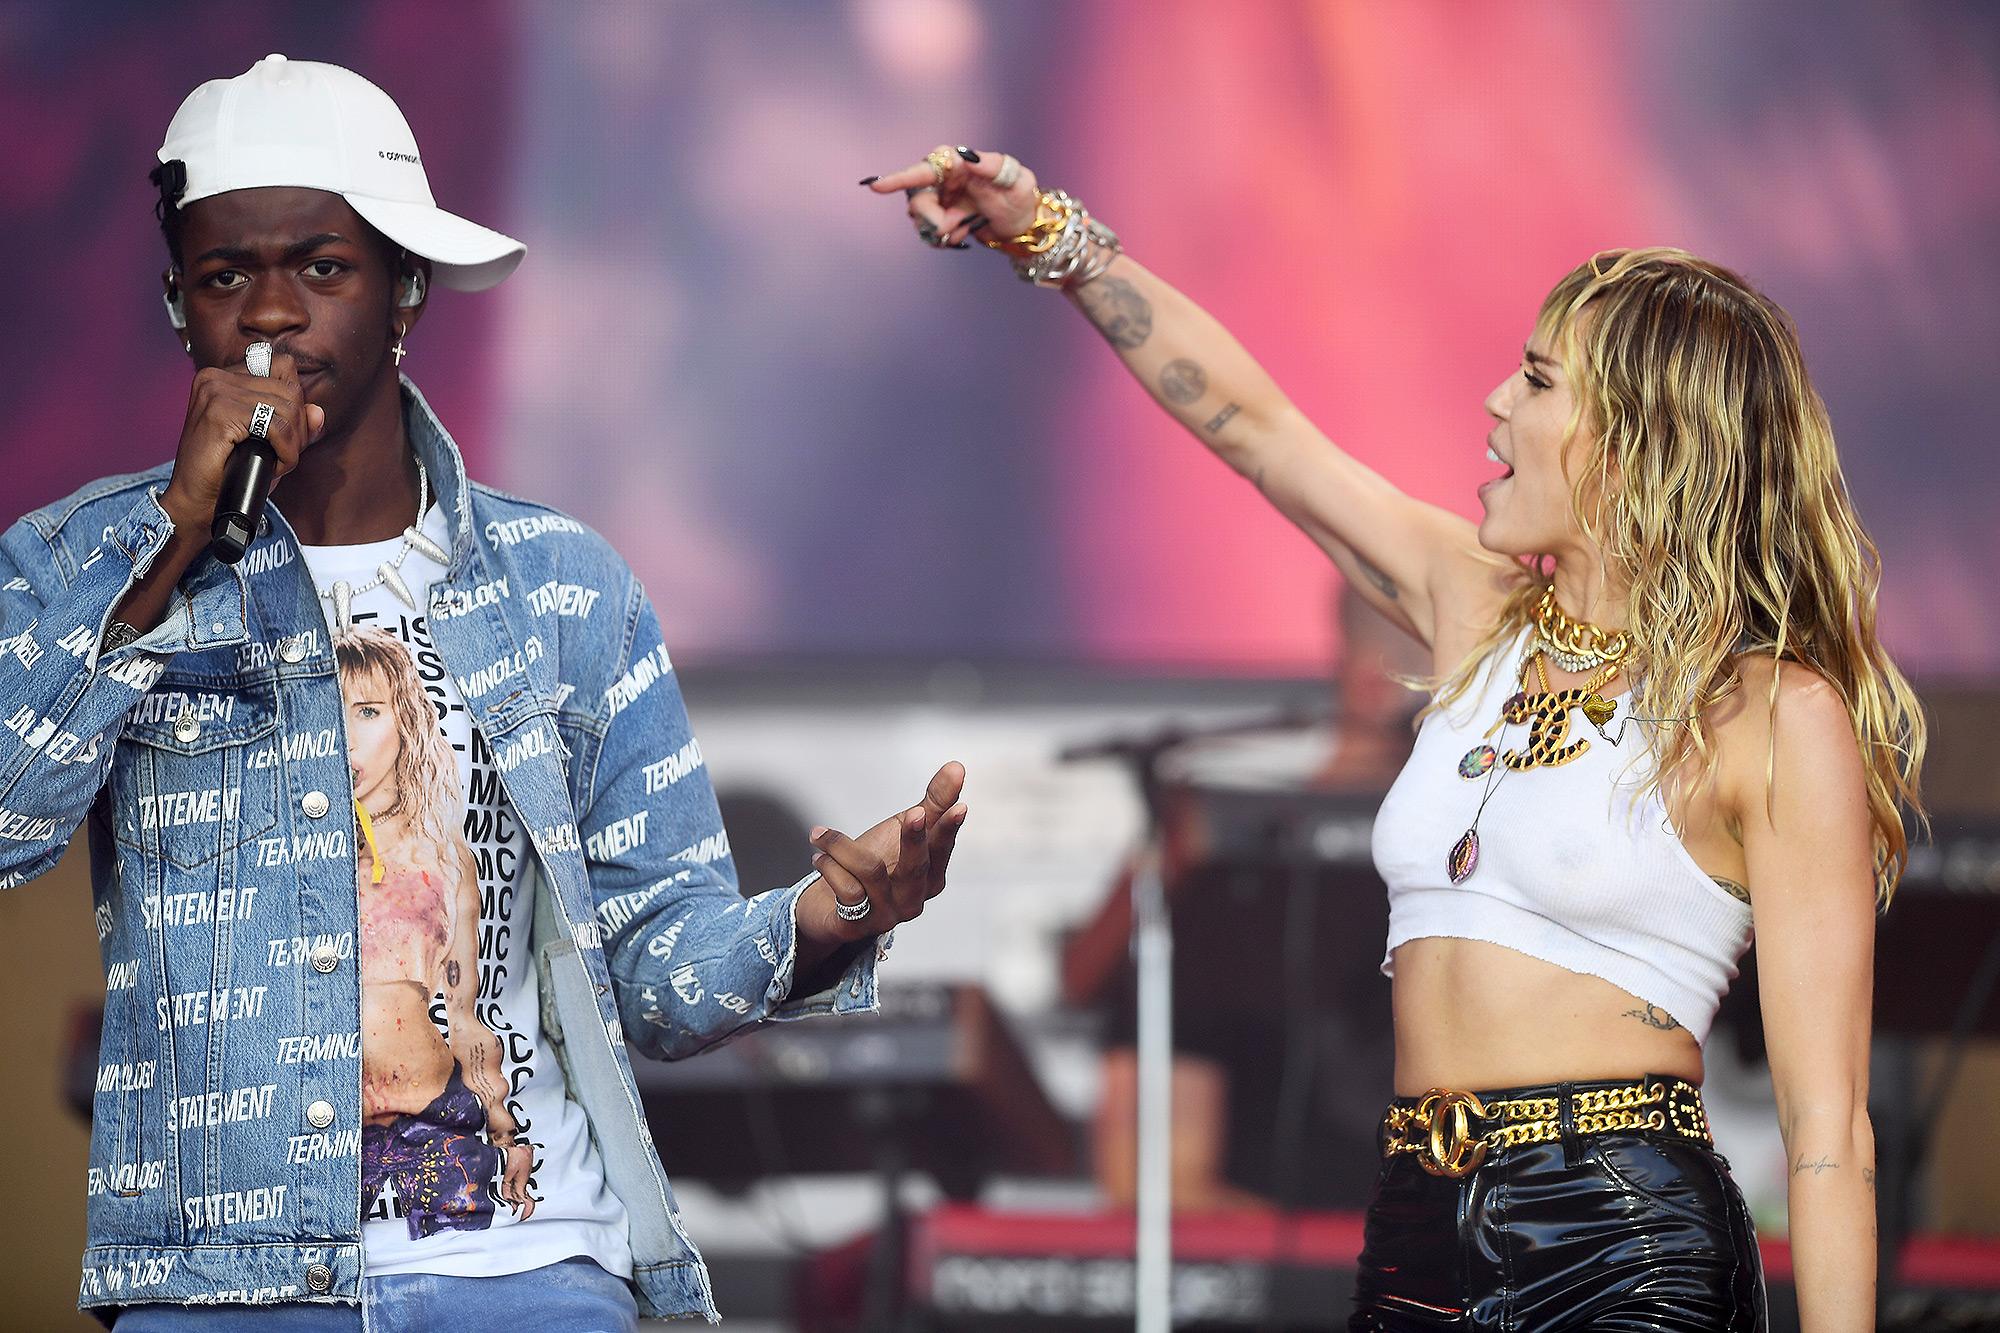 Miley Cyrus Supports Lil Nas X After He Comes Out as Gay